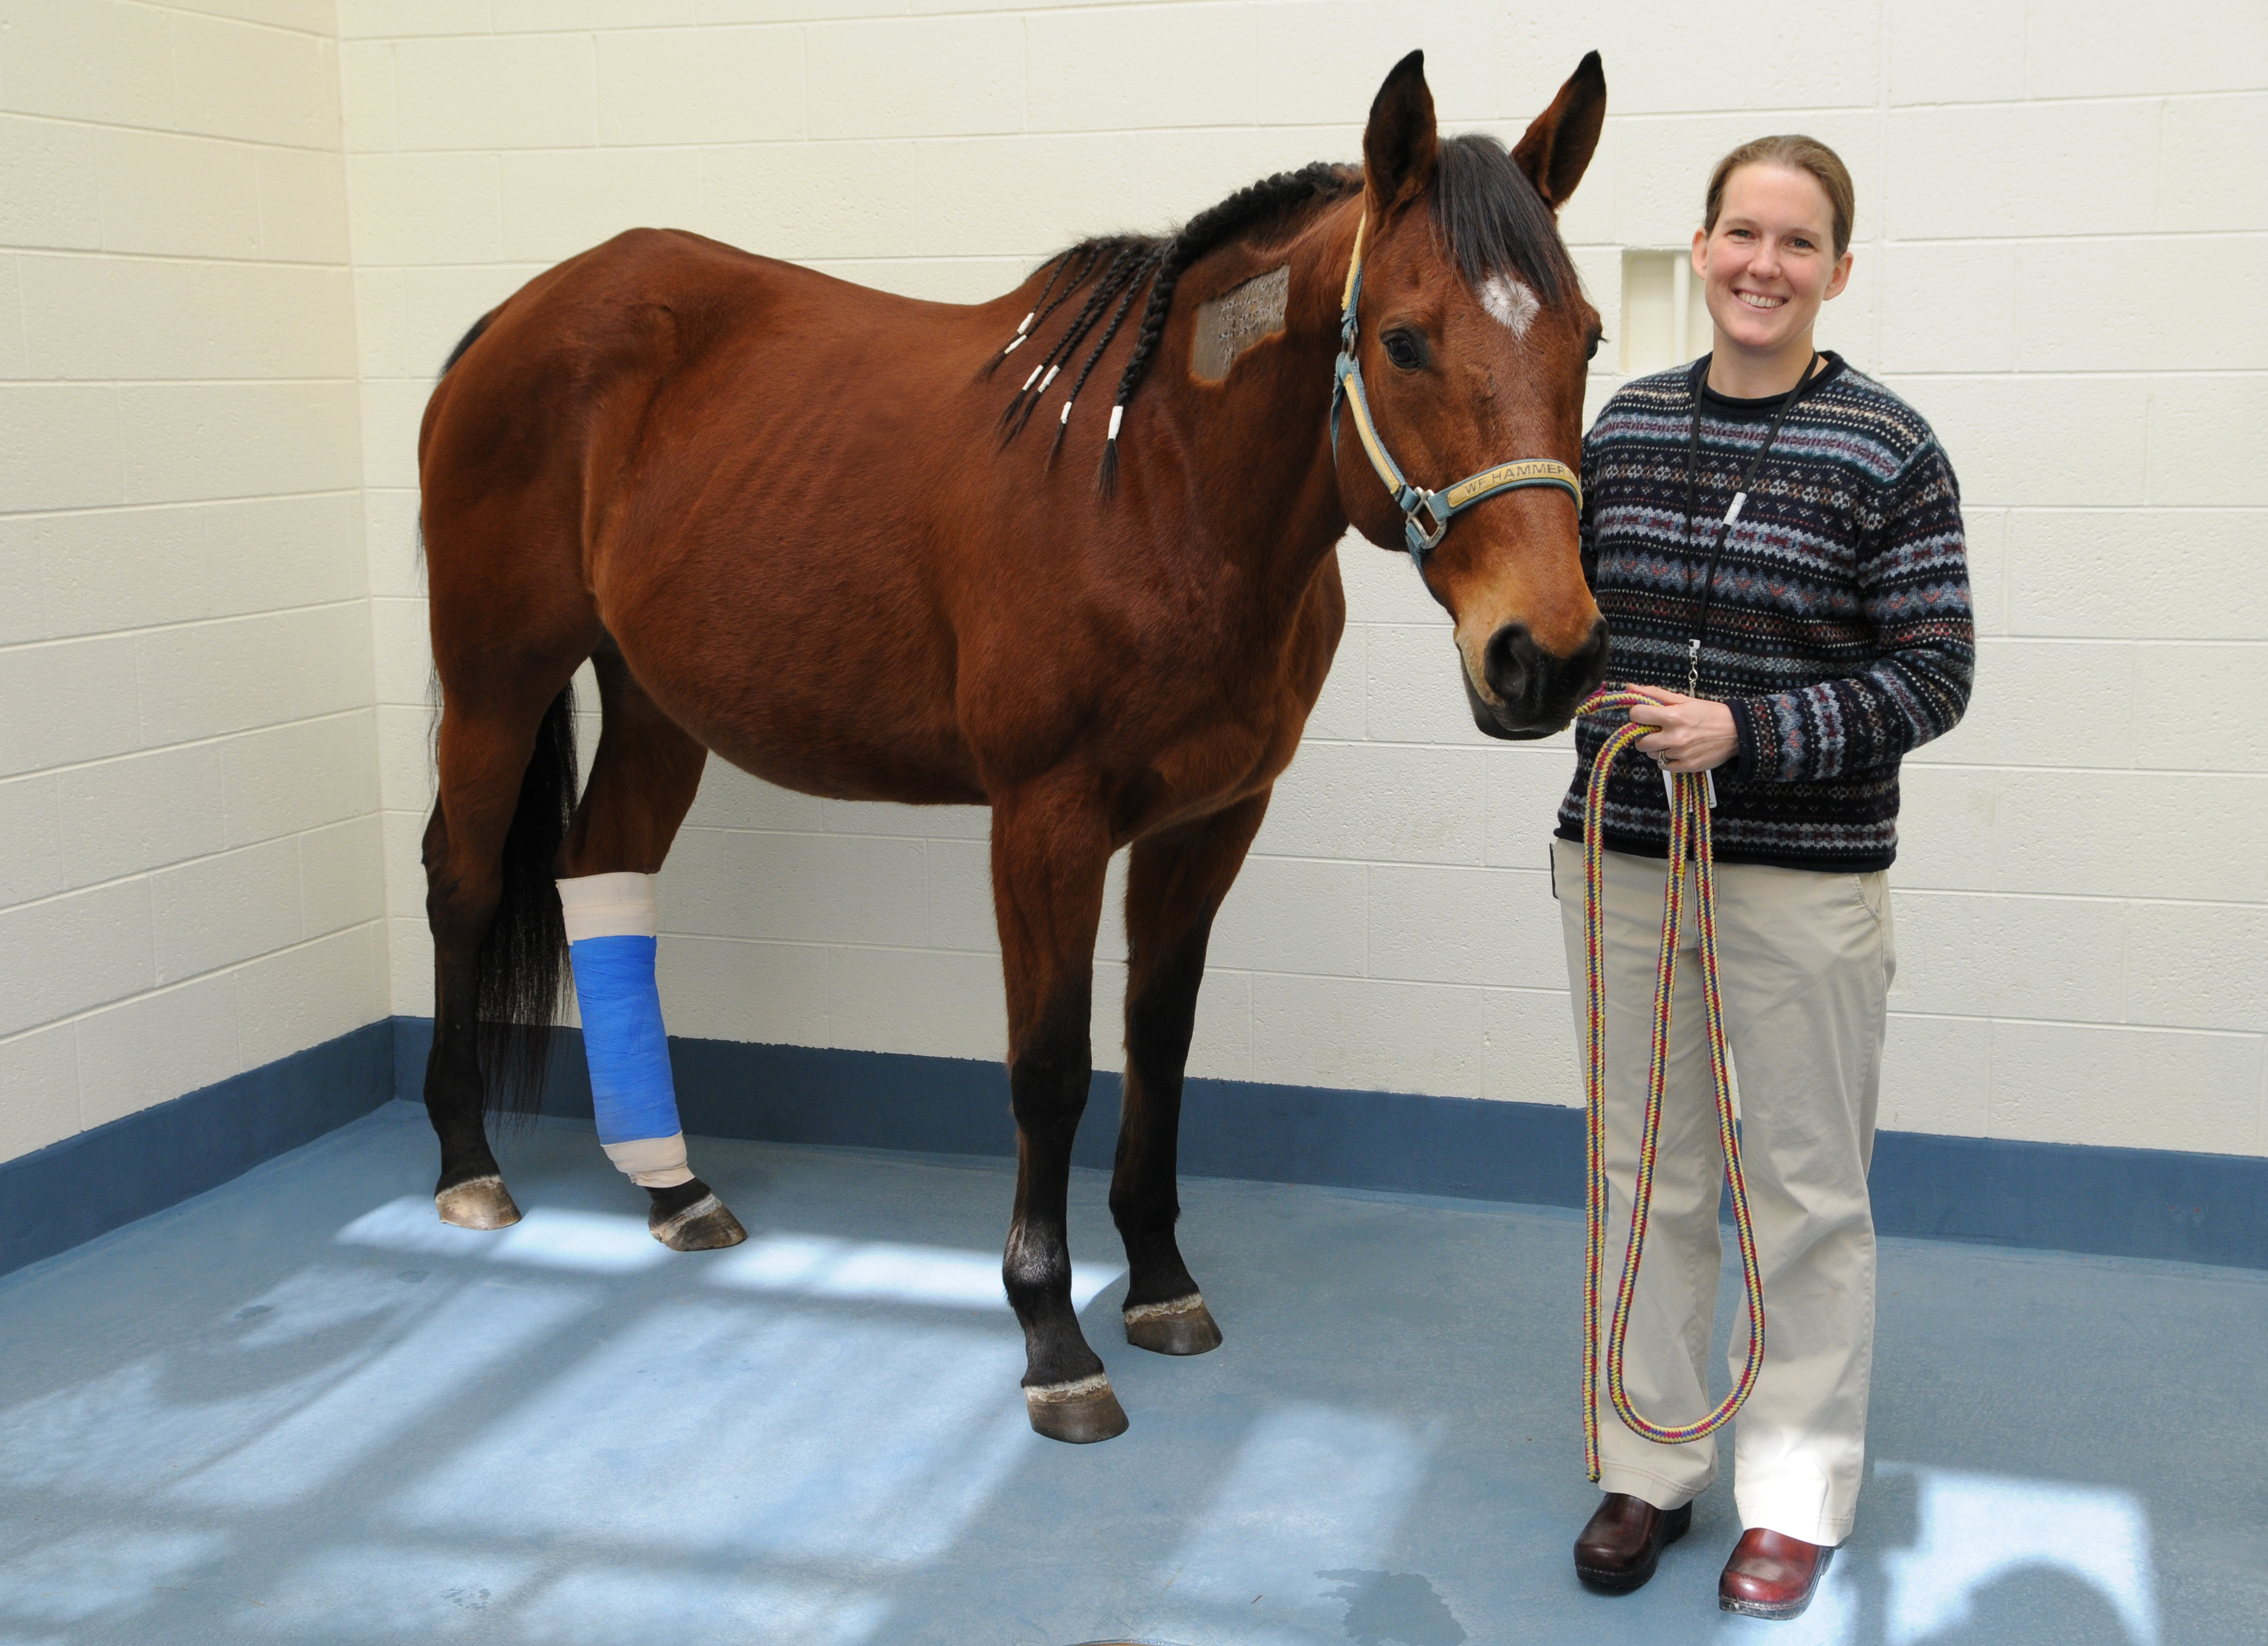 A recent donation in memory of 15-year-old Hannah George was used to help "Gracie," a therapy horse for abused, neglected and un-wanted children. Gracie is pictured above with Dr. Julie Settlage who assisted with her treatment.